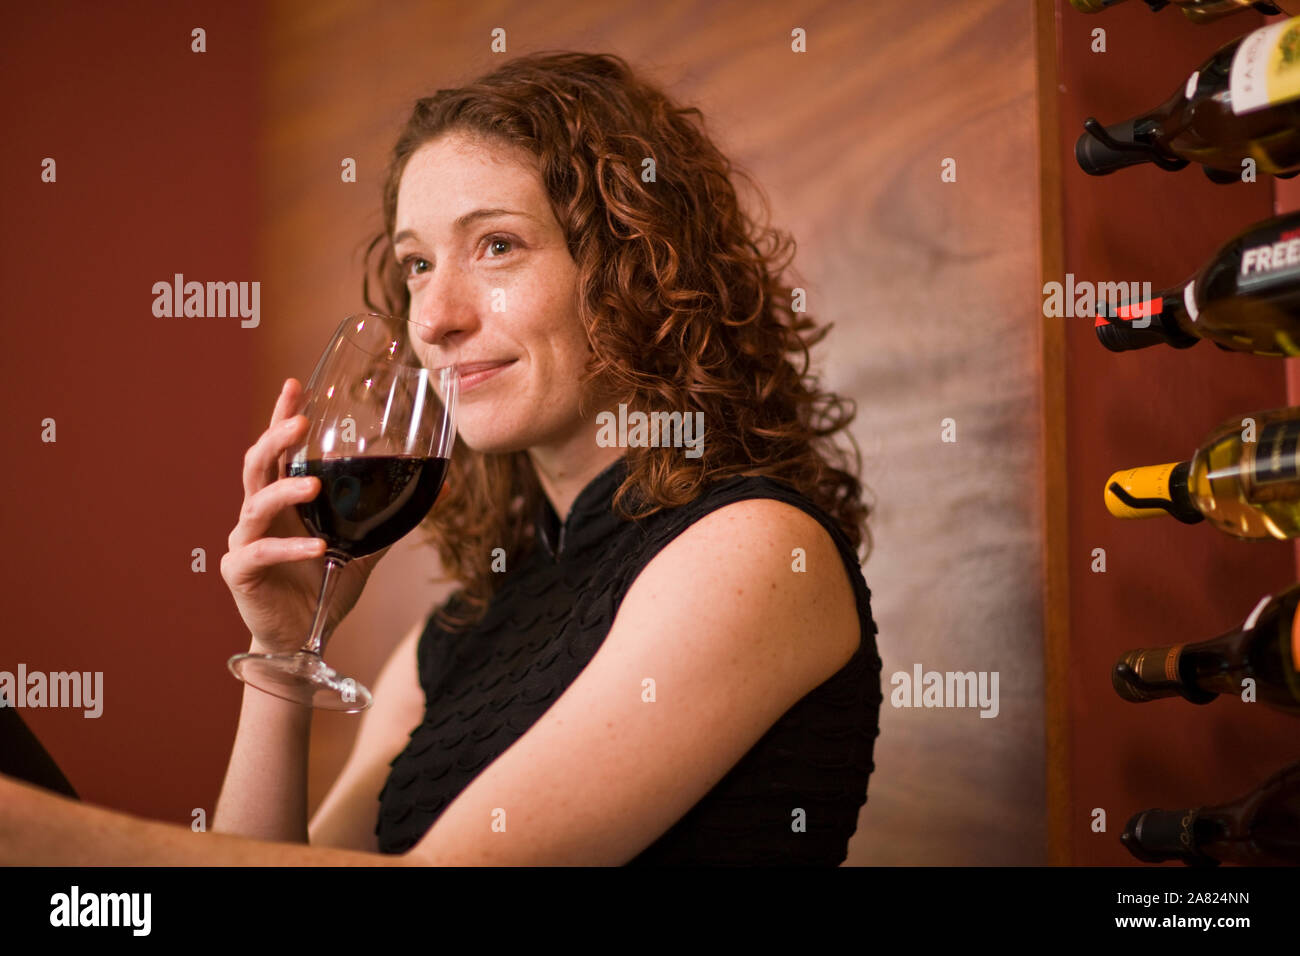 A red haired woman drinking wine Stock Photo